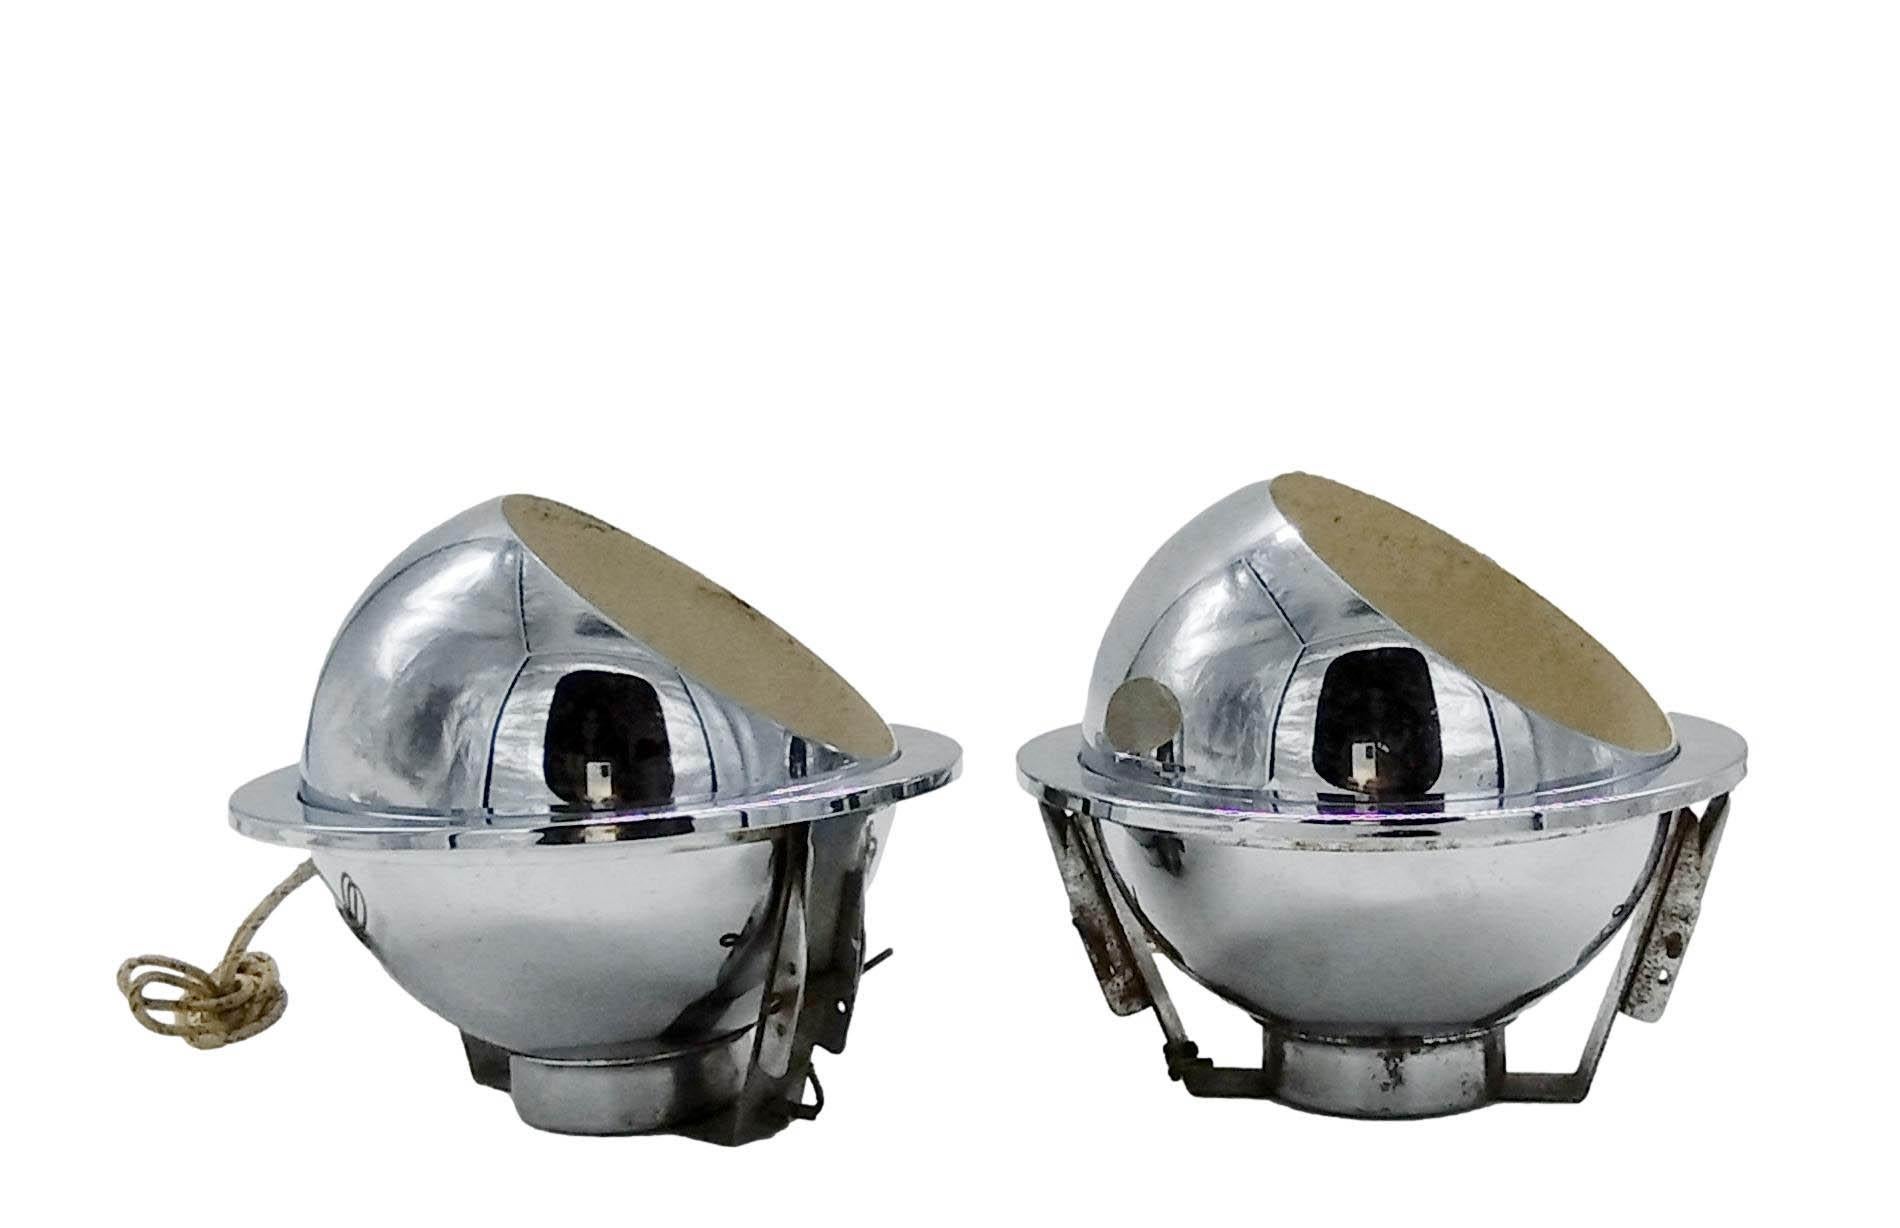 Pair of wall lights with spherical structure with external finish in chrome-plated steel and internal finish in white steel. Designed by Goffredo Reggiani for Reggiani Illuminazione, 1970s. Good condition.